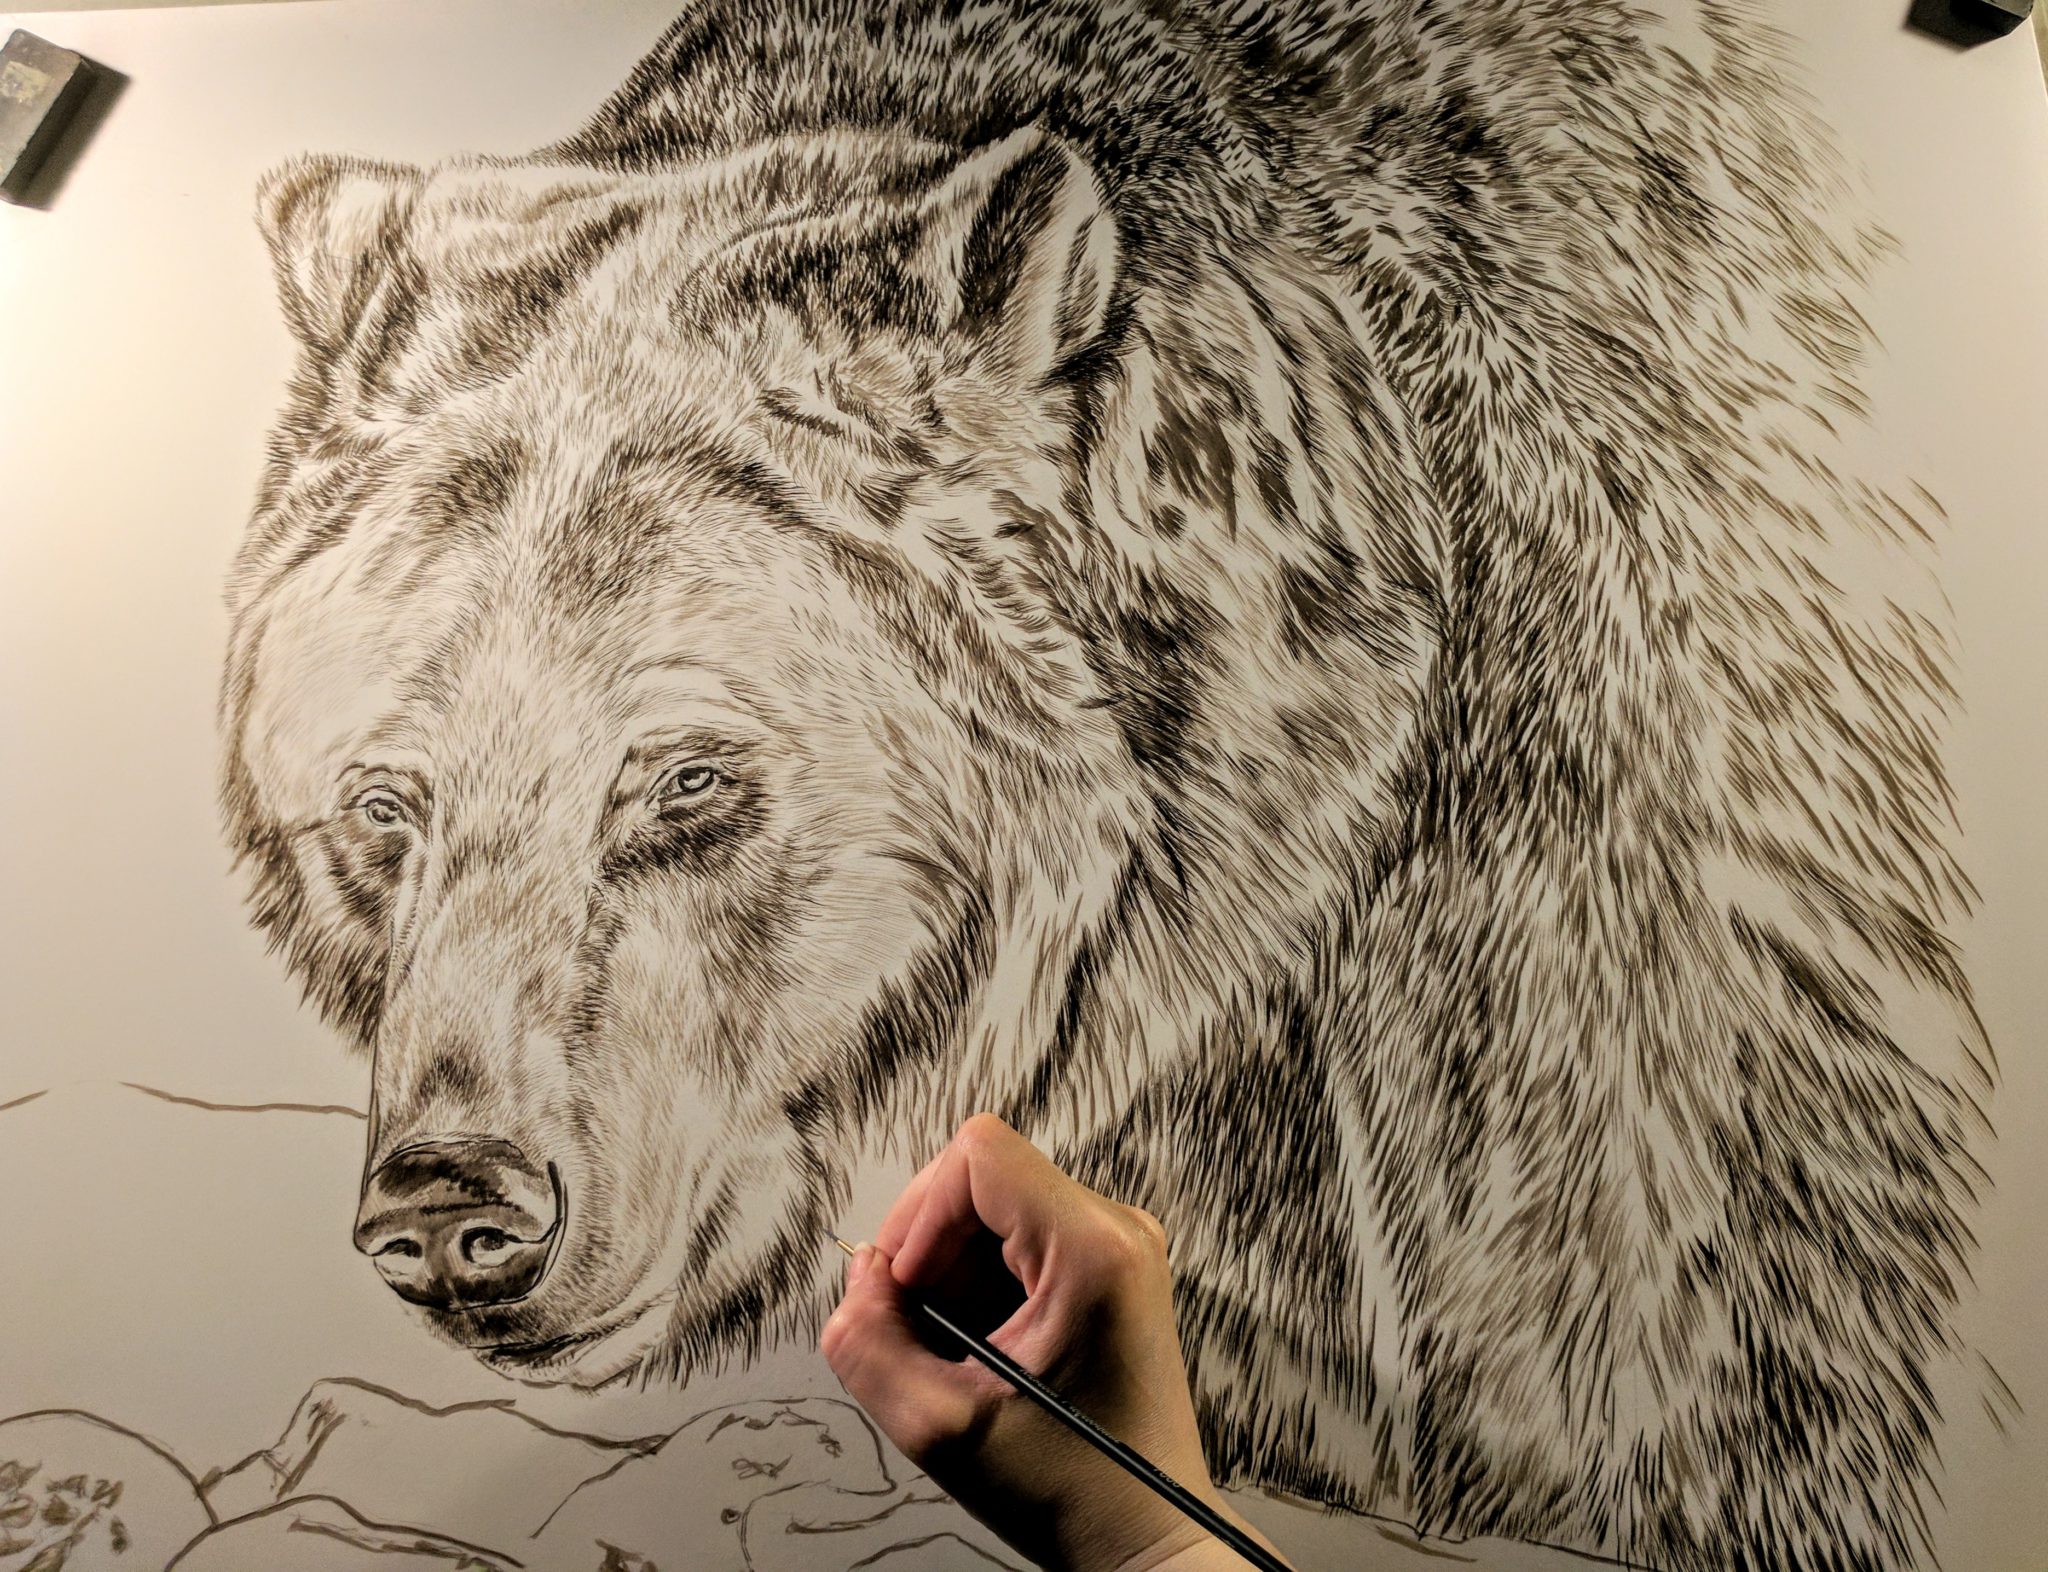 Grizzly Bear (Presently Untitled) in progress, 20x24in, watercolor on board, Currently Available